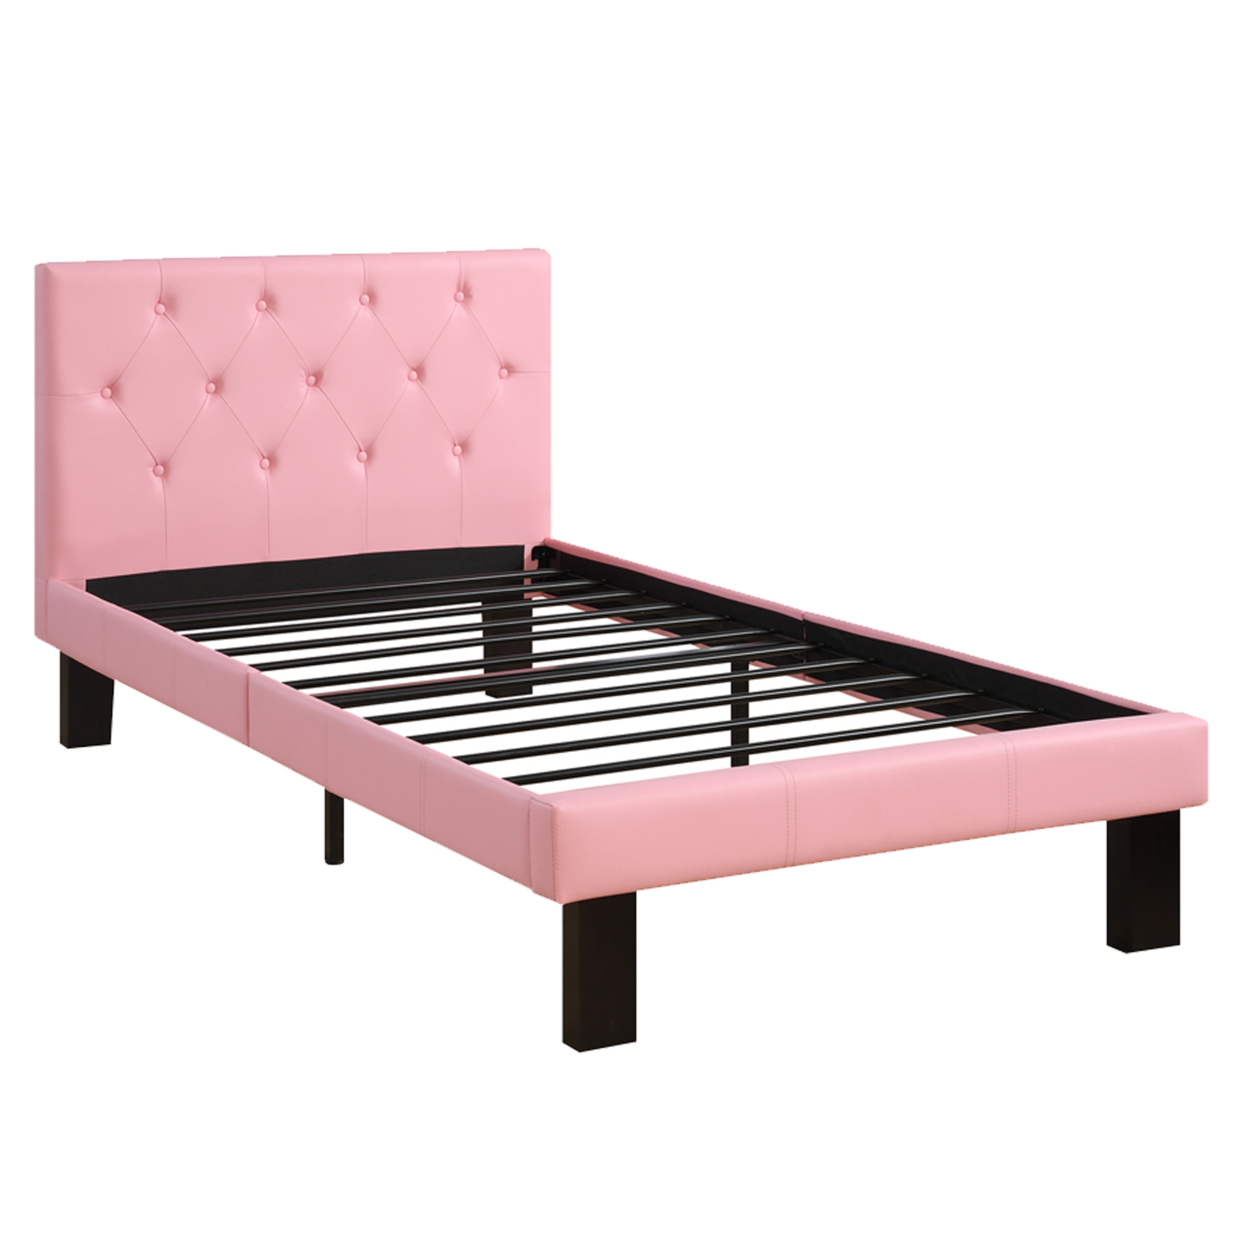 Faux Leather Upholstered Twin Size Bed With Tufted Headboard Pink- Saltoro Sherpi